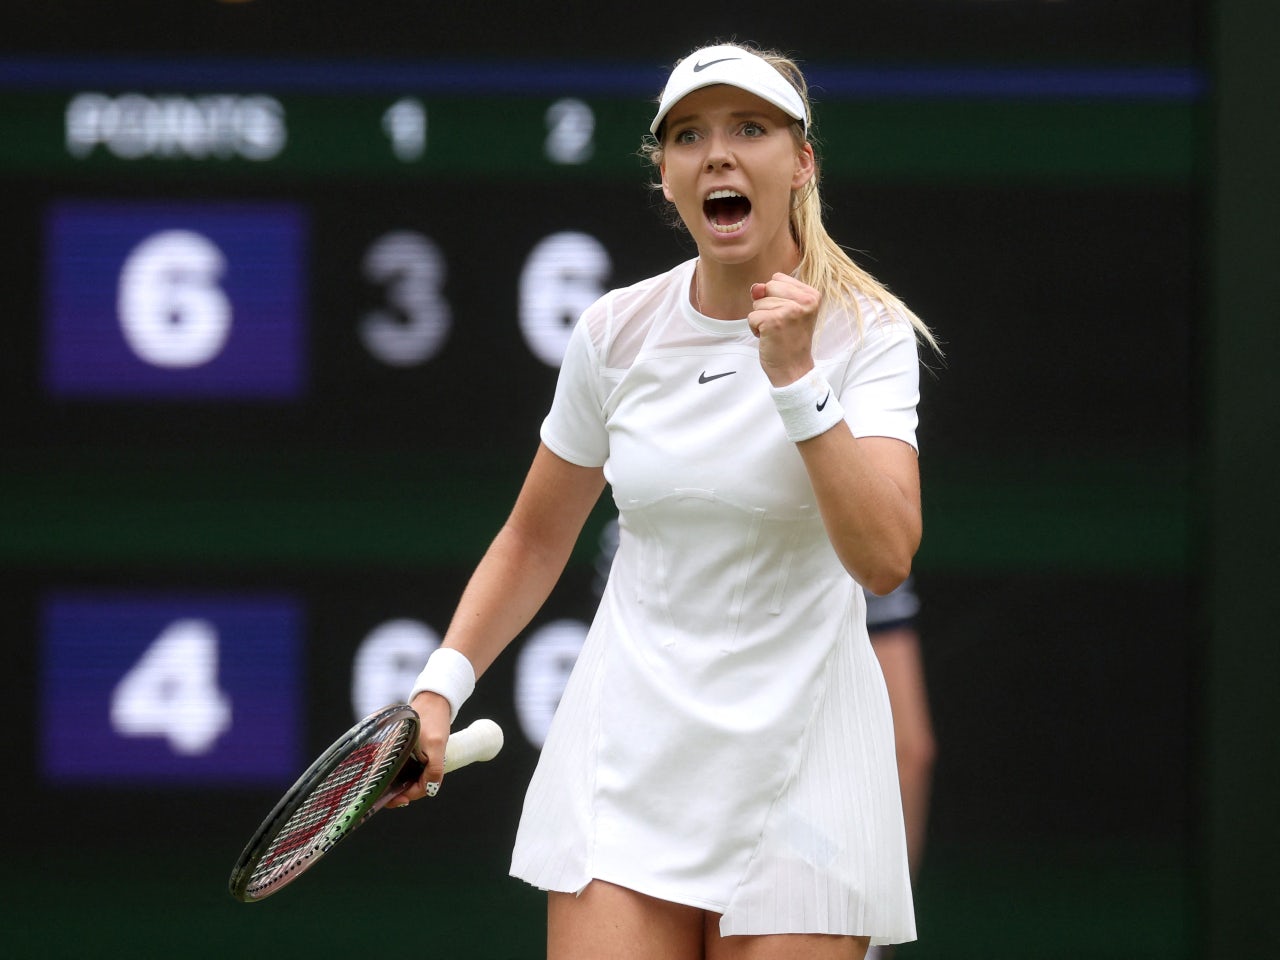 Katie Boulter to face Jodie Burrage in all-British Nottingham final